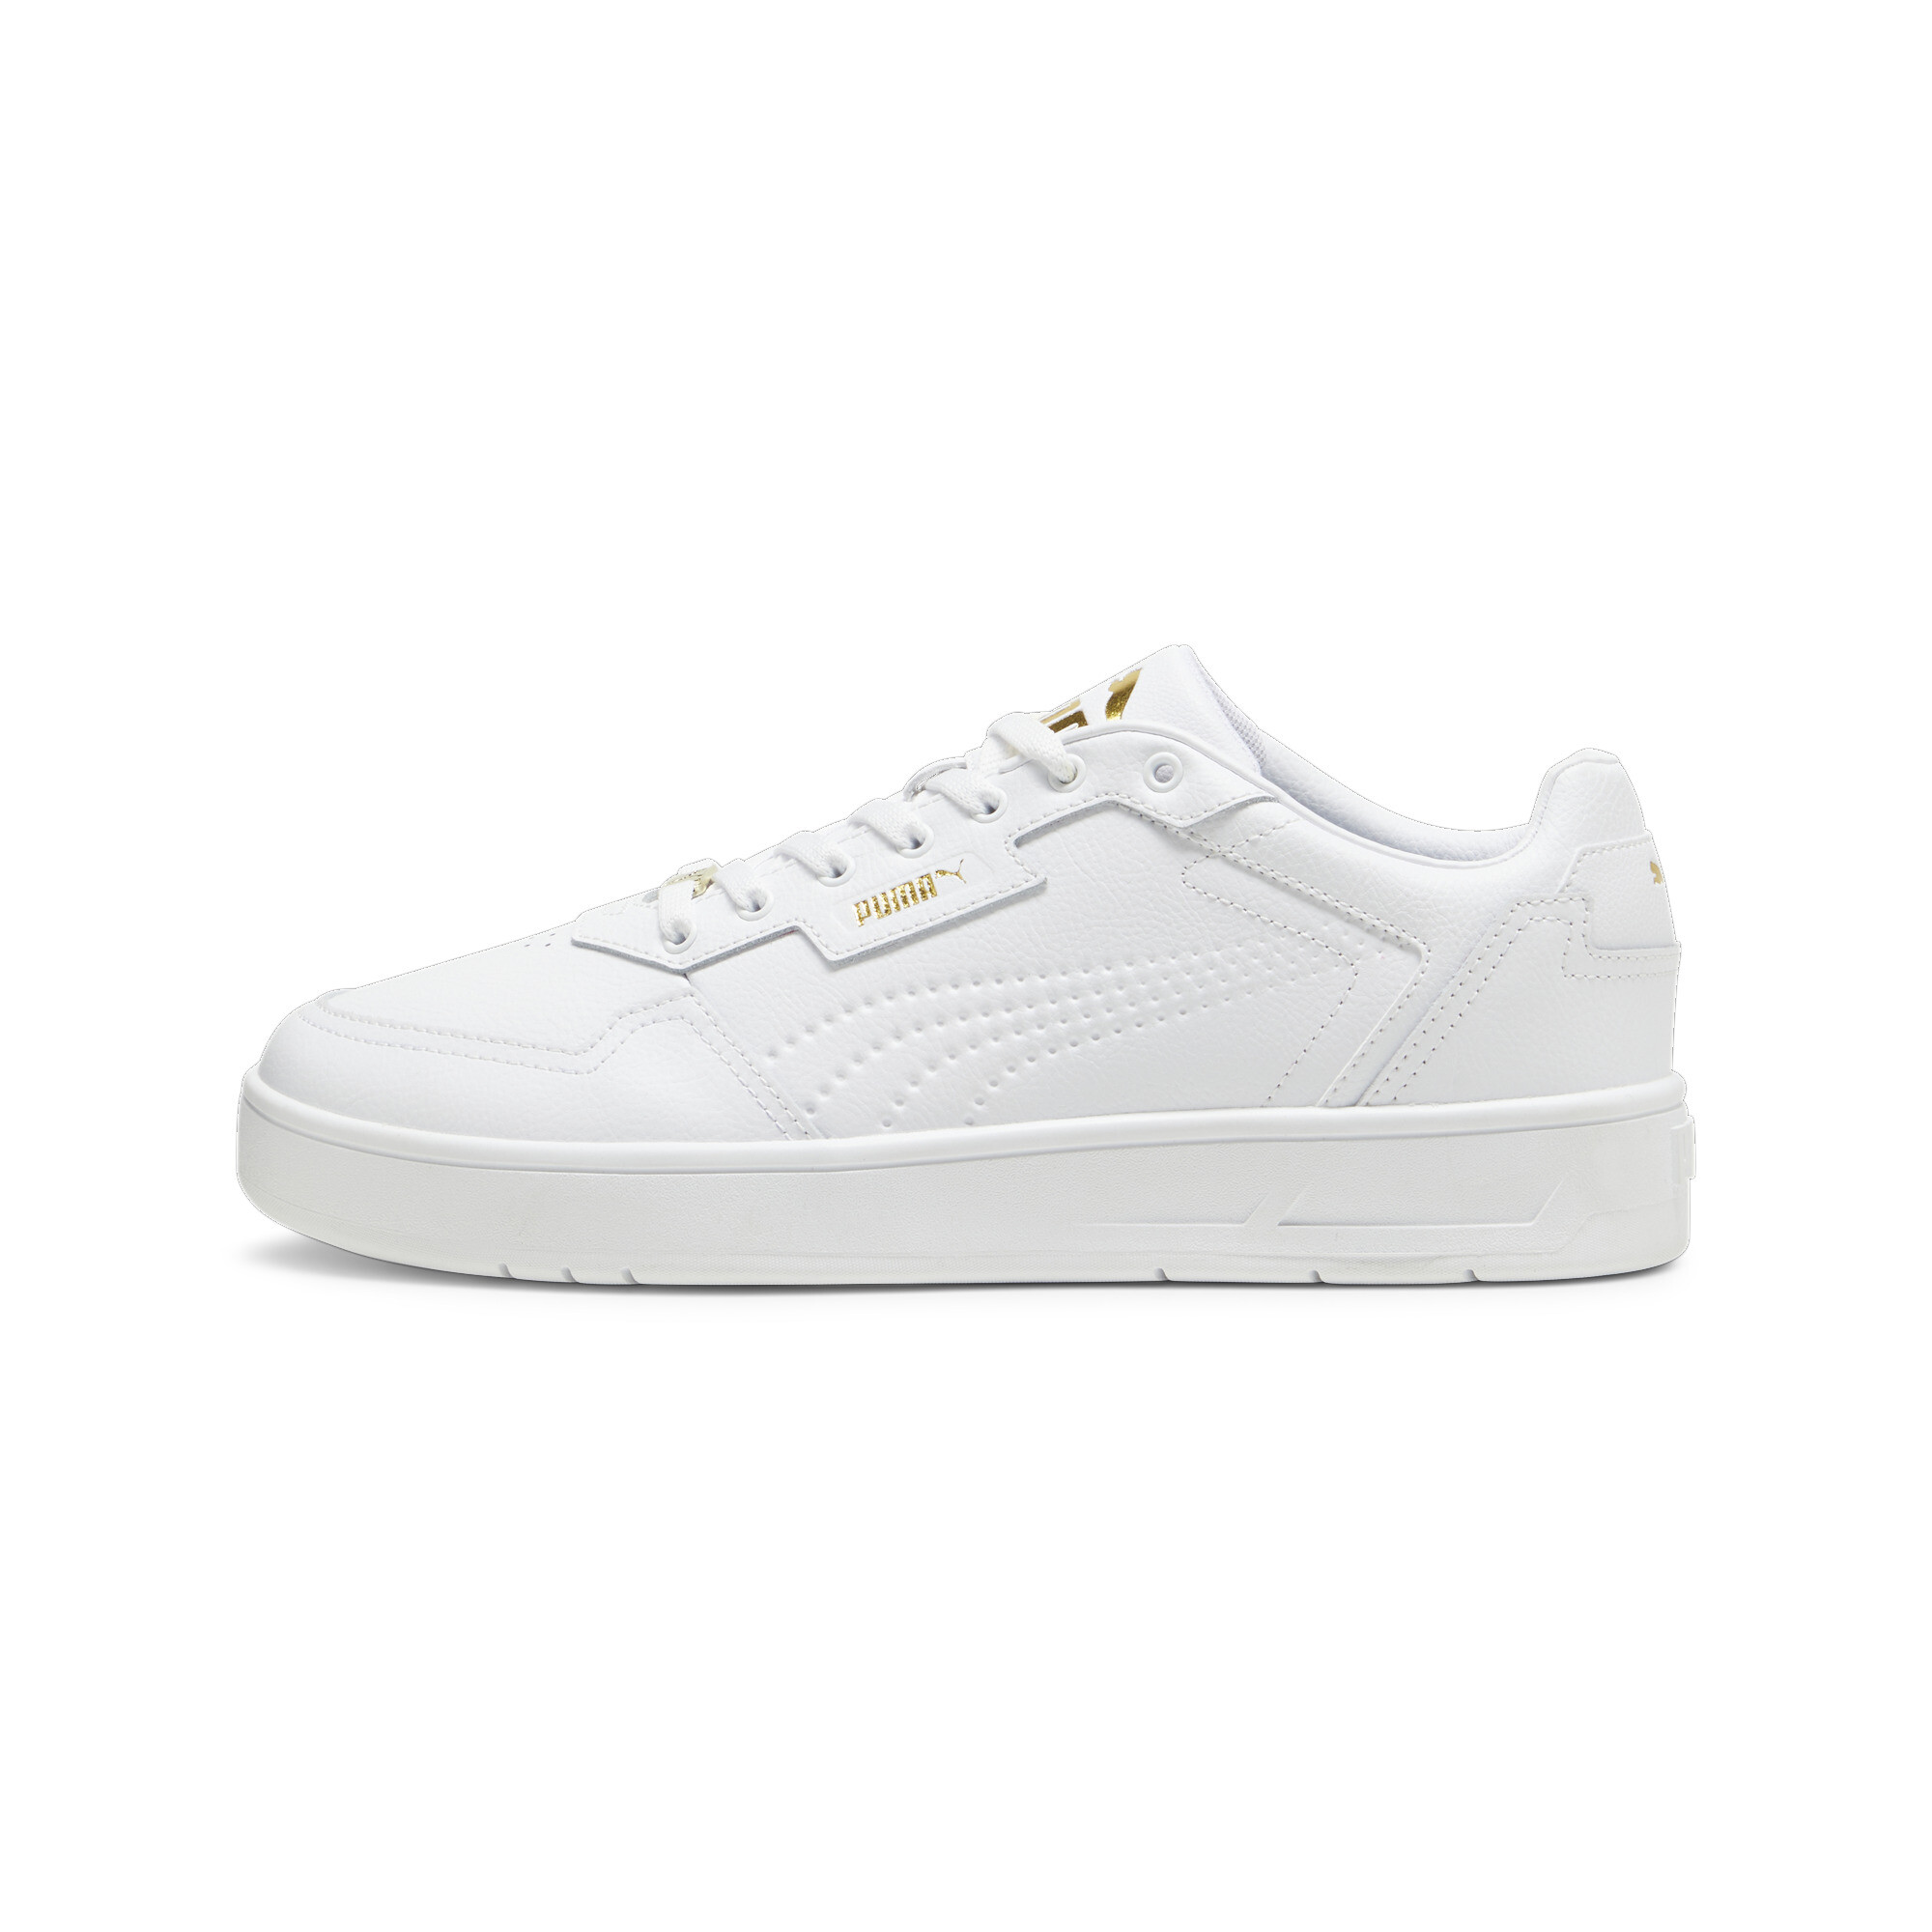 Puma Court Classic Lux Sneakers, White, Size 35.5, Shoes